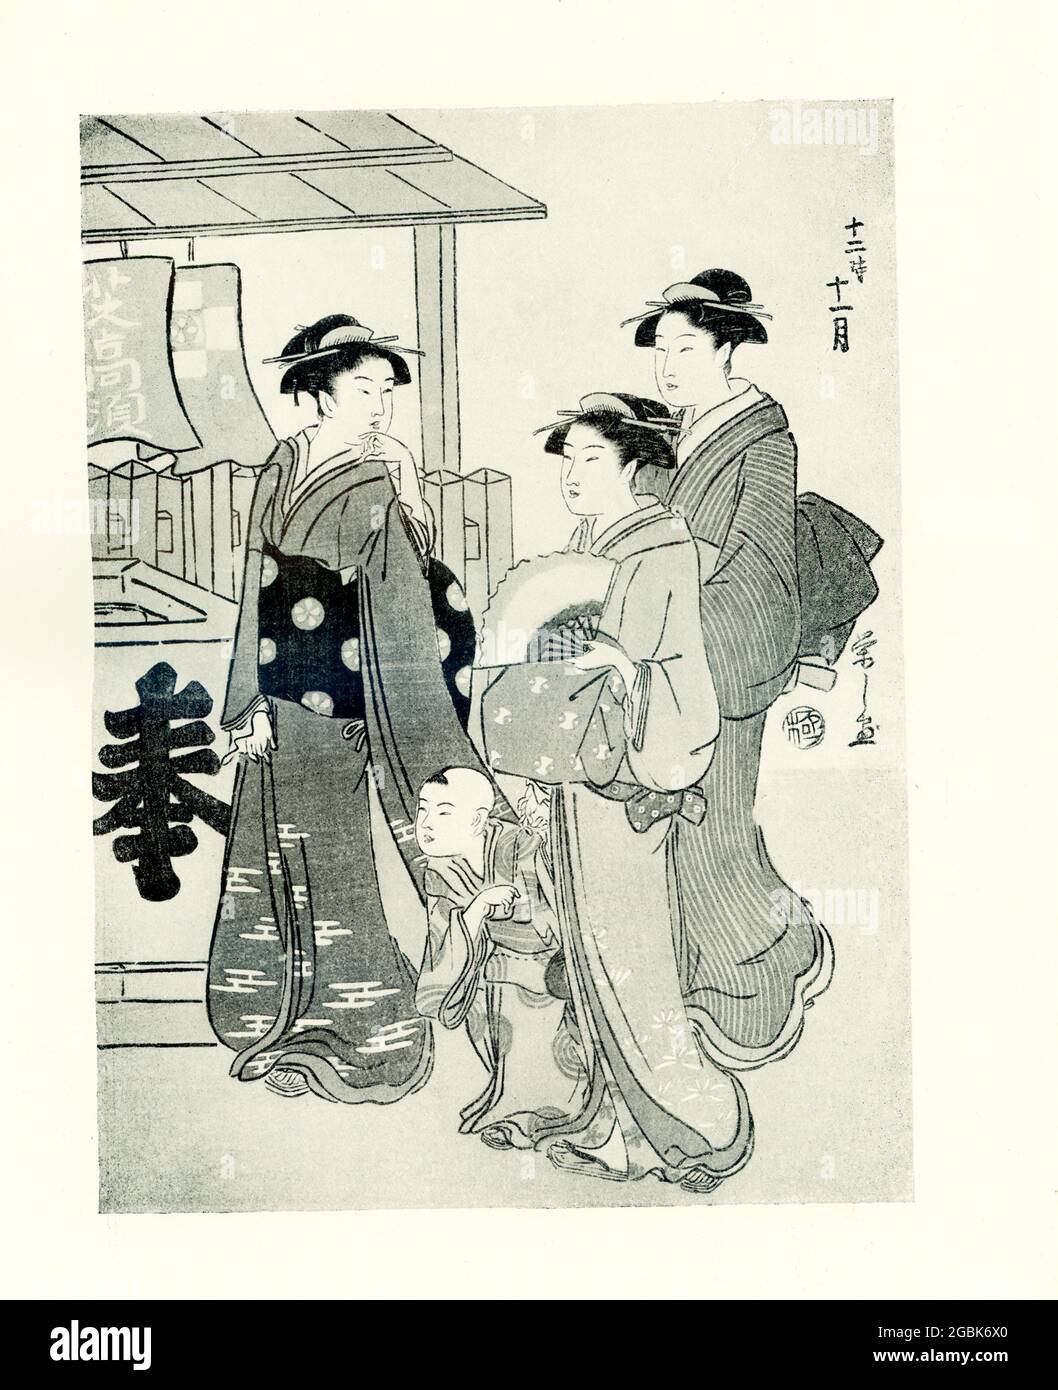 This 1920 image shows a lady followed by her maid turning to look at a courtesan with her boy-attendant. It is signed by Yeishi, and is one of a series of Twelve Months. This was done for the eleventh month. Hosoi Yeishi  was  a Japanese artist who lived from 1756-1829. Stock Photo